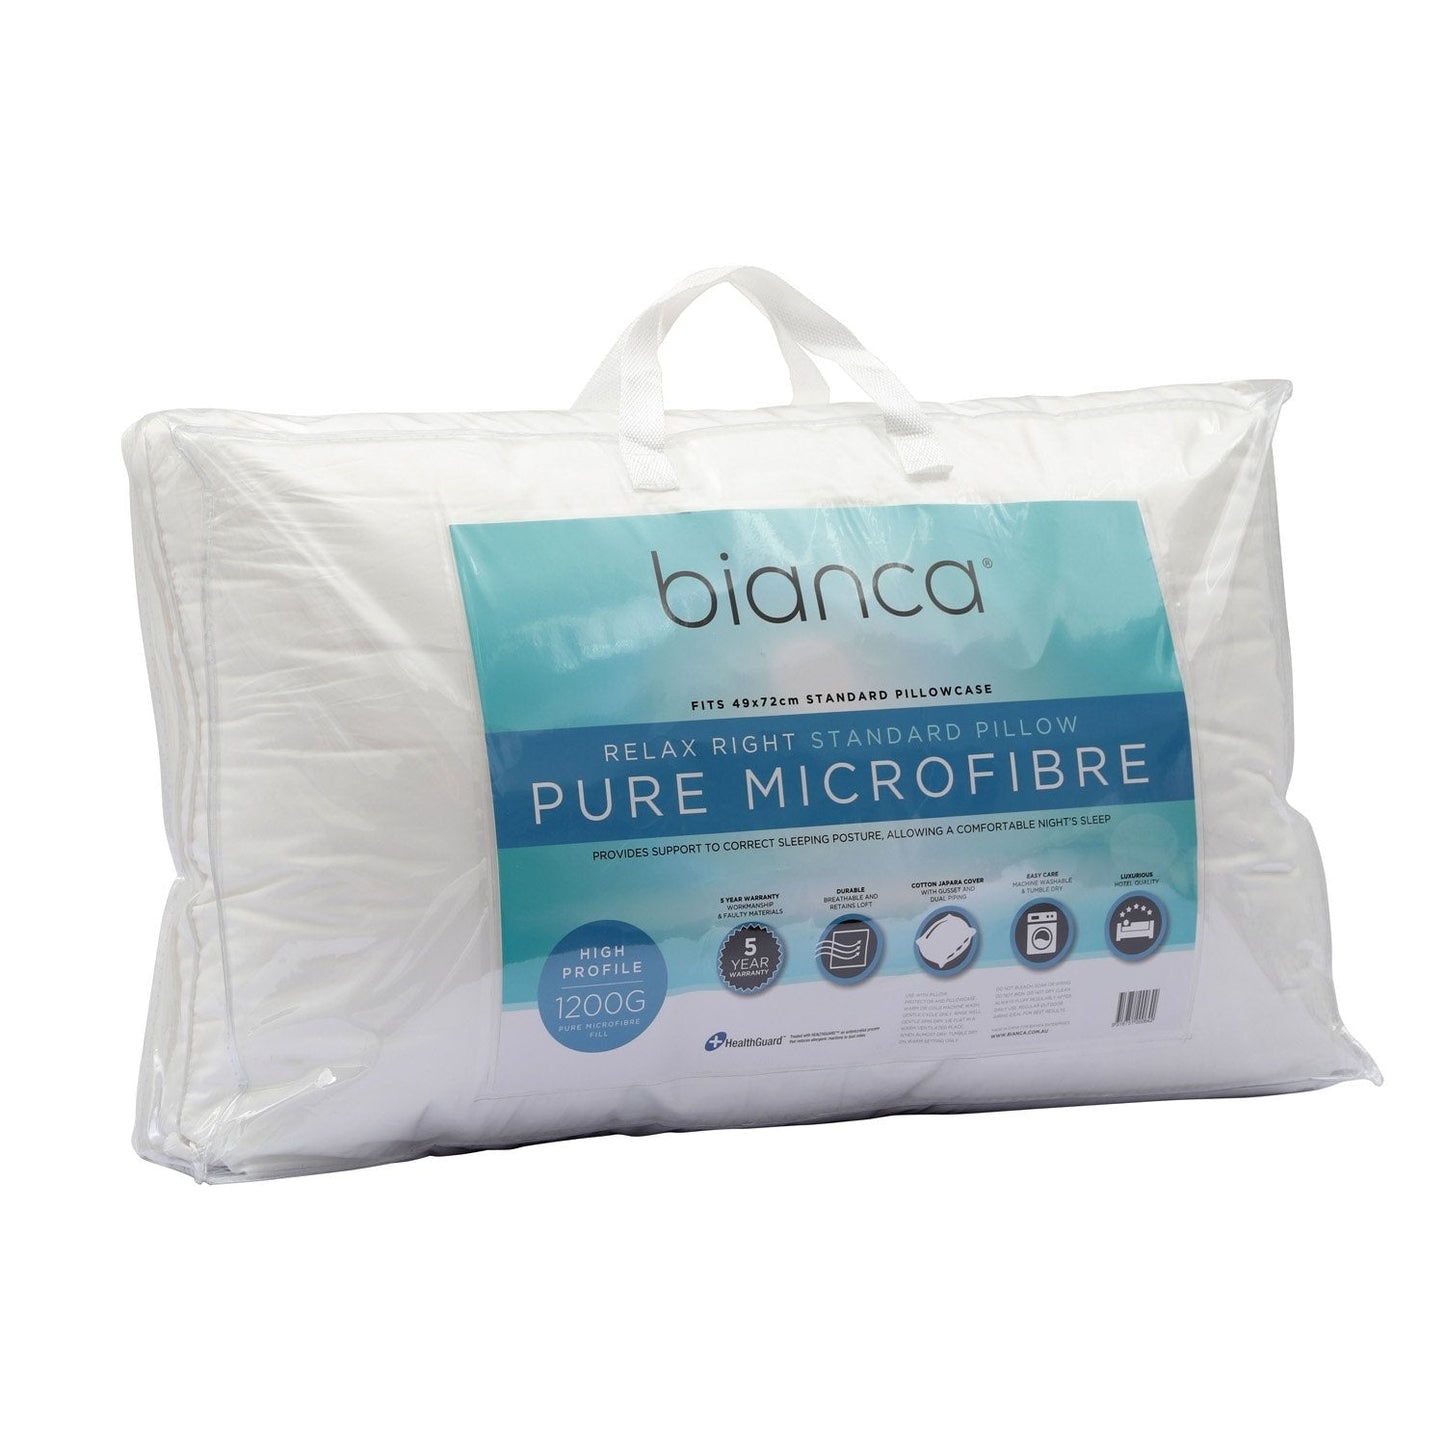 Relax Right Pure Microfibre Pillow High Profile 1200g by Bianca